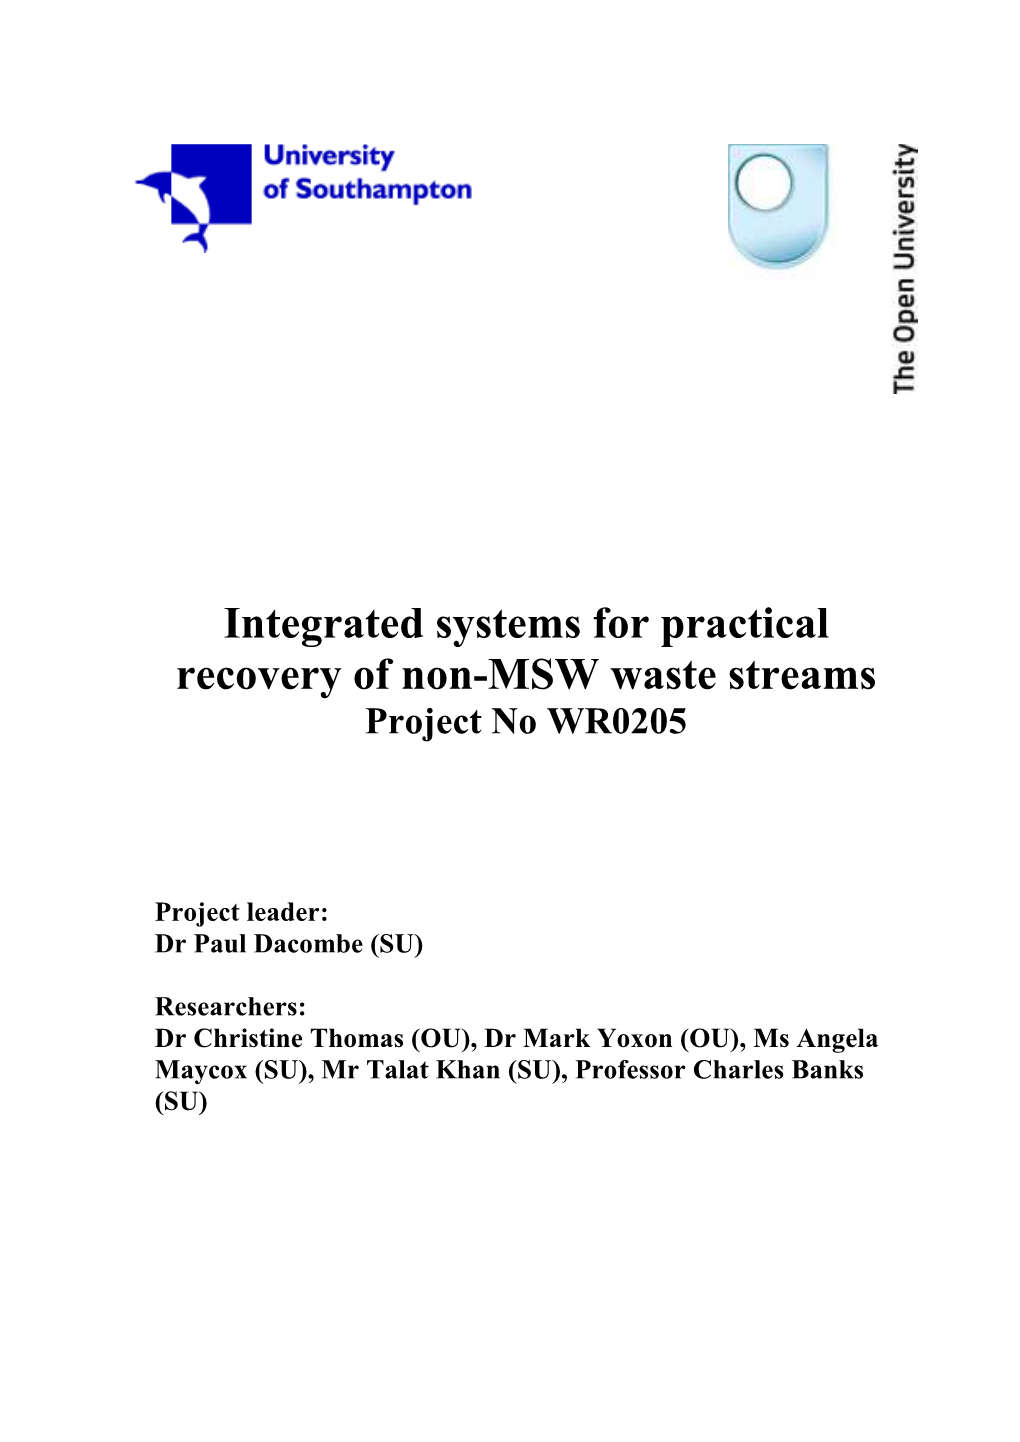 Integrated Systems for Practical Recovery of Non-MSW Waste Streams Project No WR0205